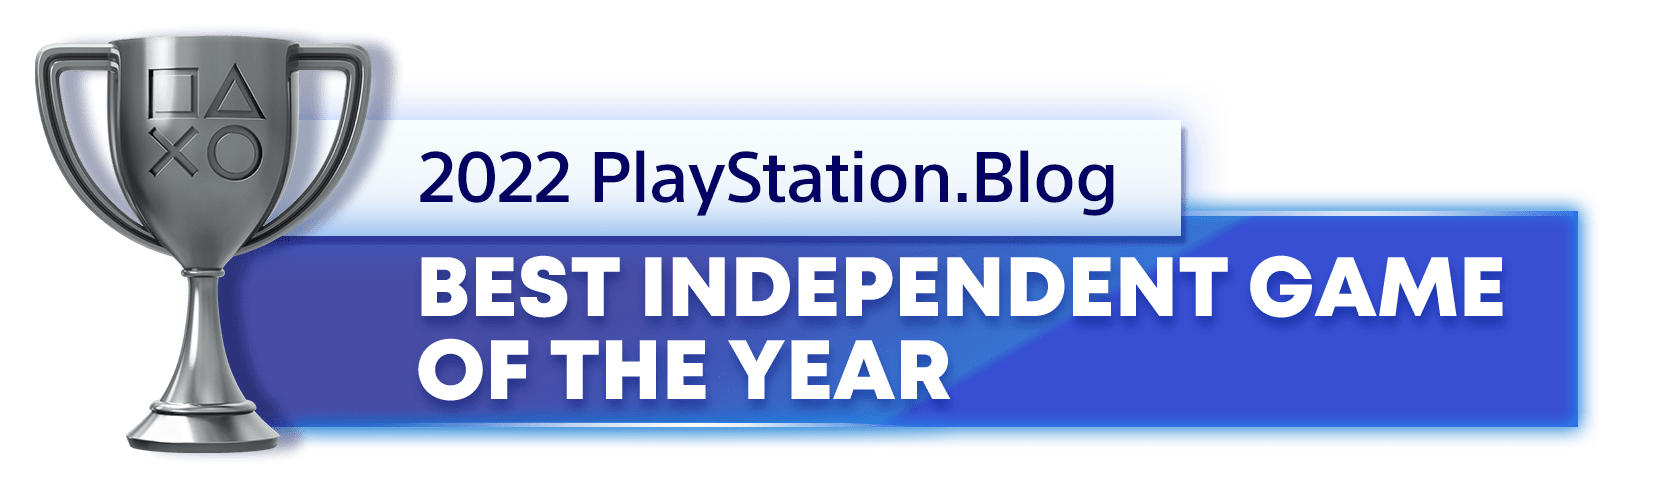 PlayStation Blog's 2022 Silver trophy for best independent game of the year